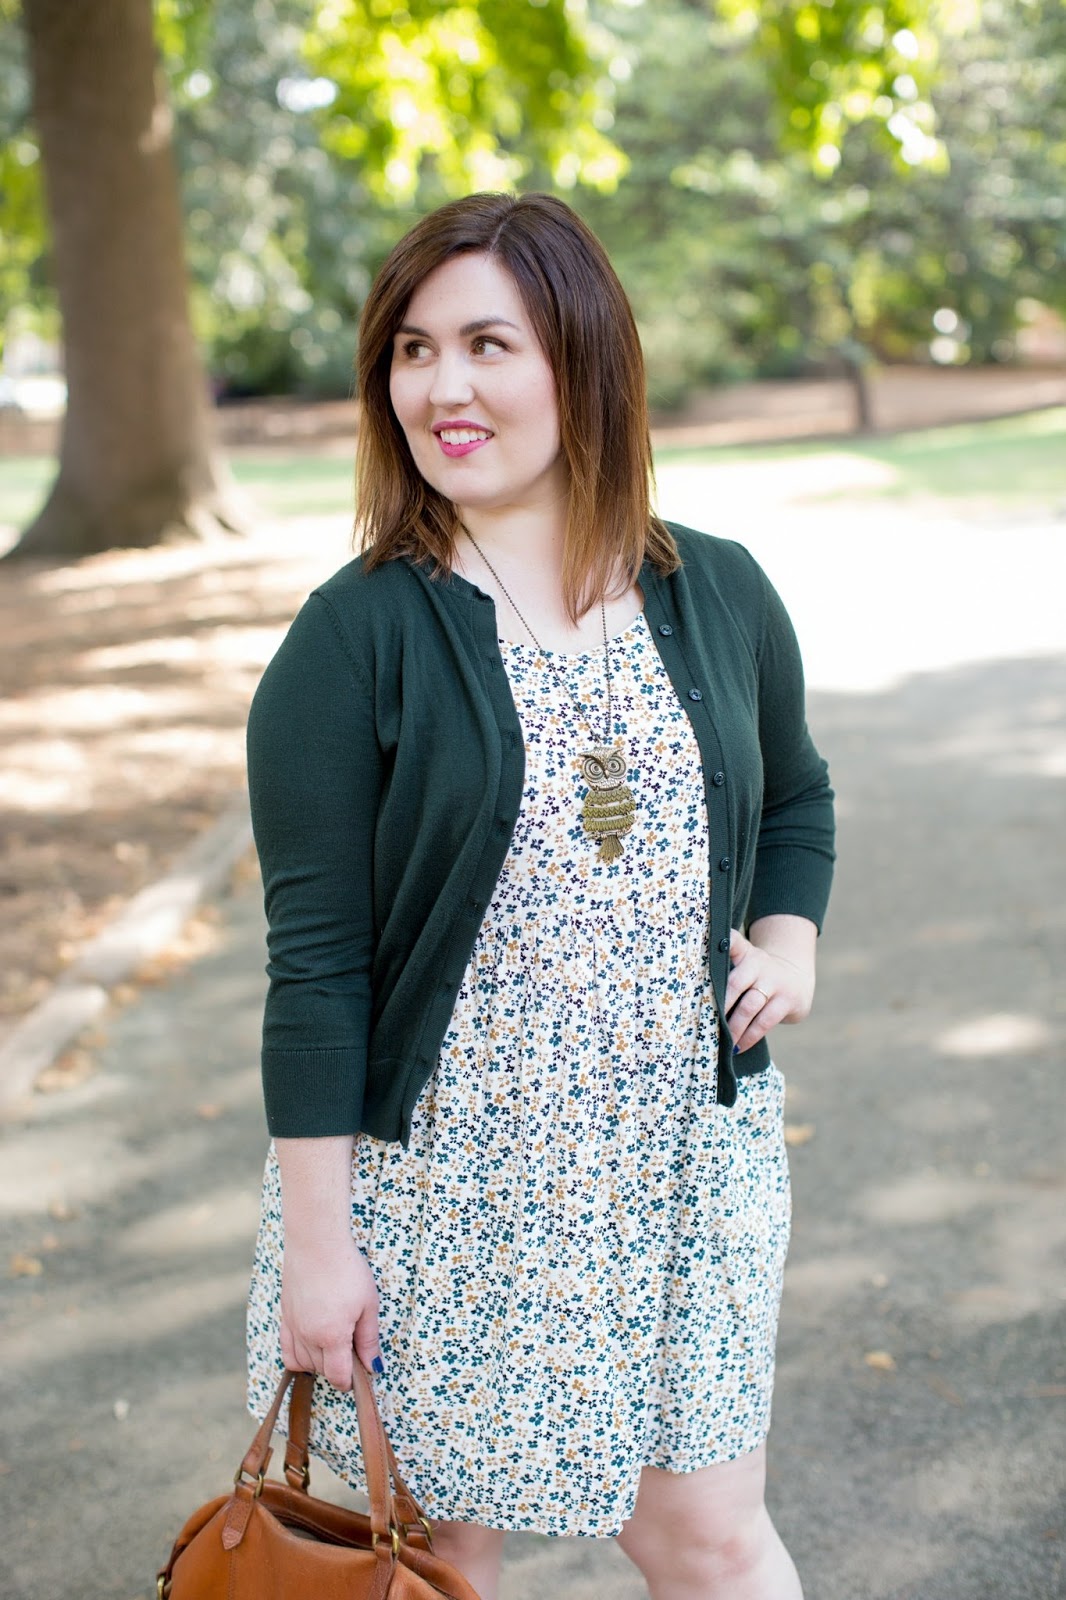 Rebecca Lately Old Navy Floral Dress Loft Cardigan Owl Necklace Madwell Kensington Forever 21 Heels